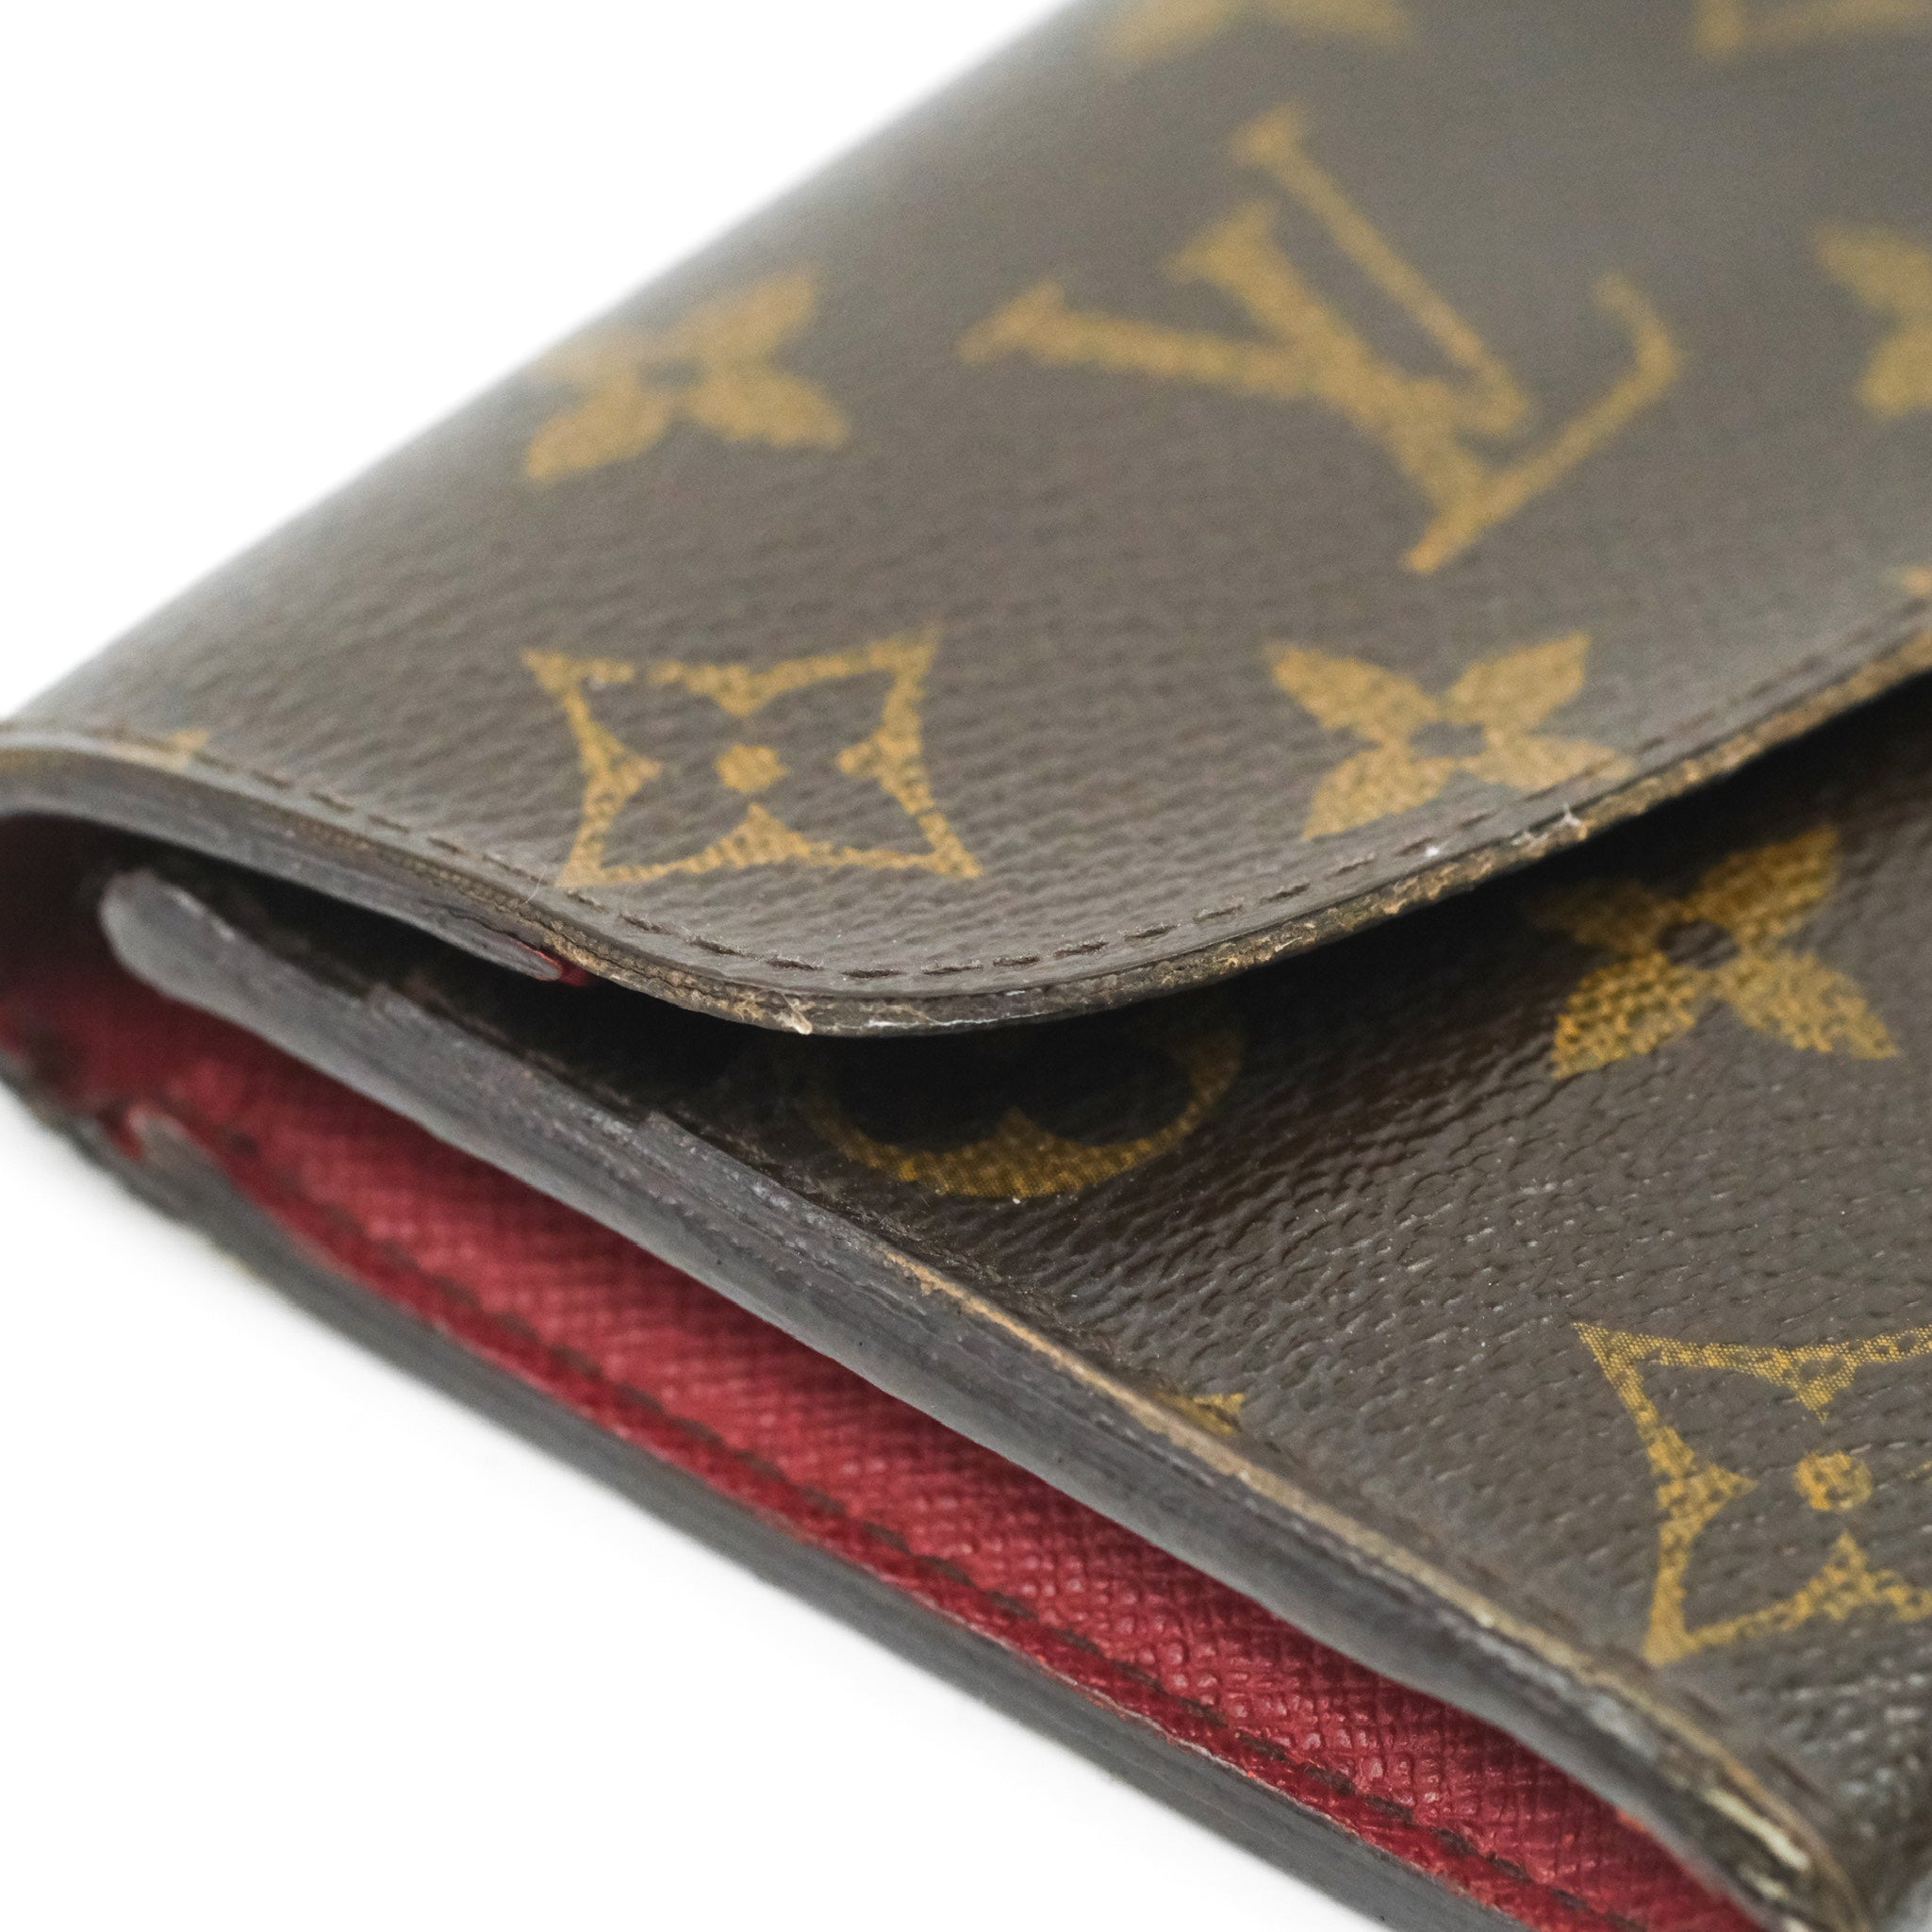 Wallet Louis Vuitton Red in Not specified - 24963812